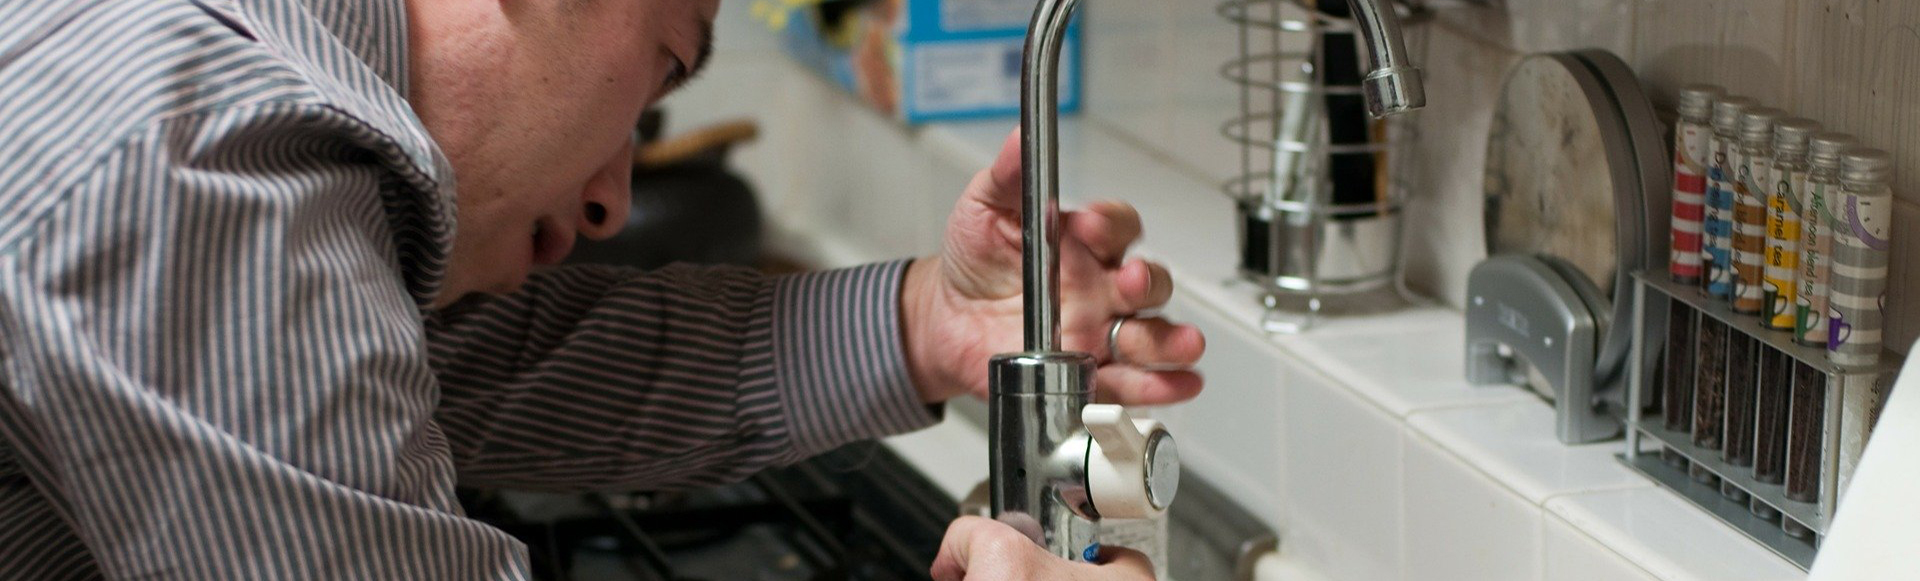 In-home Plumbing Protection Available Through NLC Service Line Warranty Program